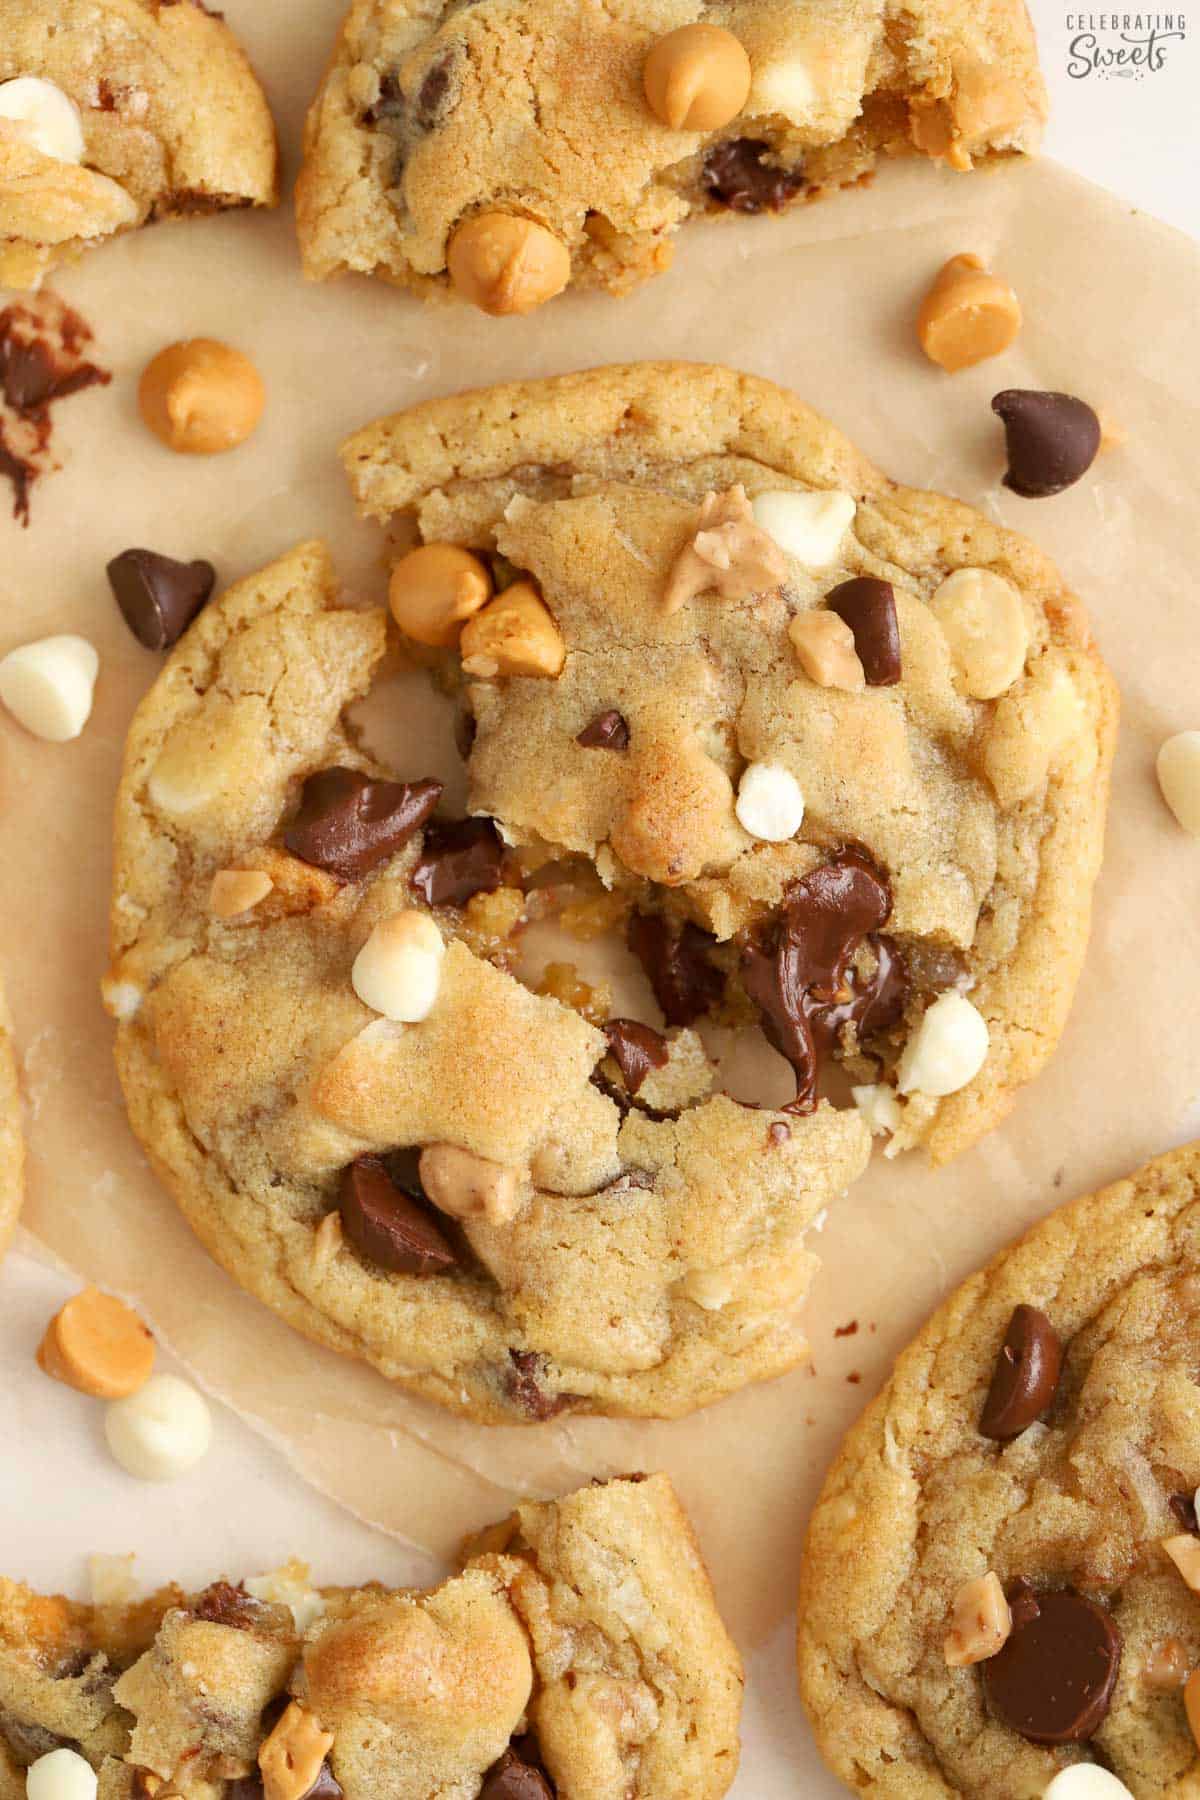 Cookies topped with white chocolate, butterscotch, and chocolate chips.